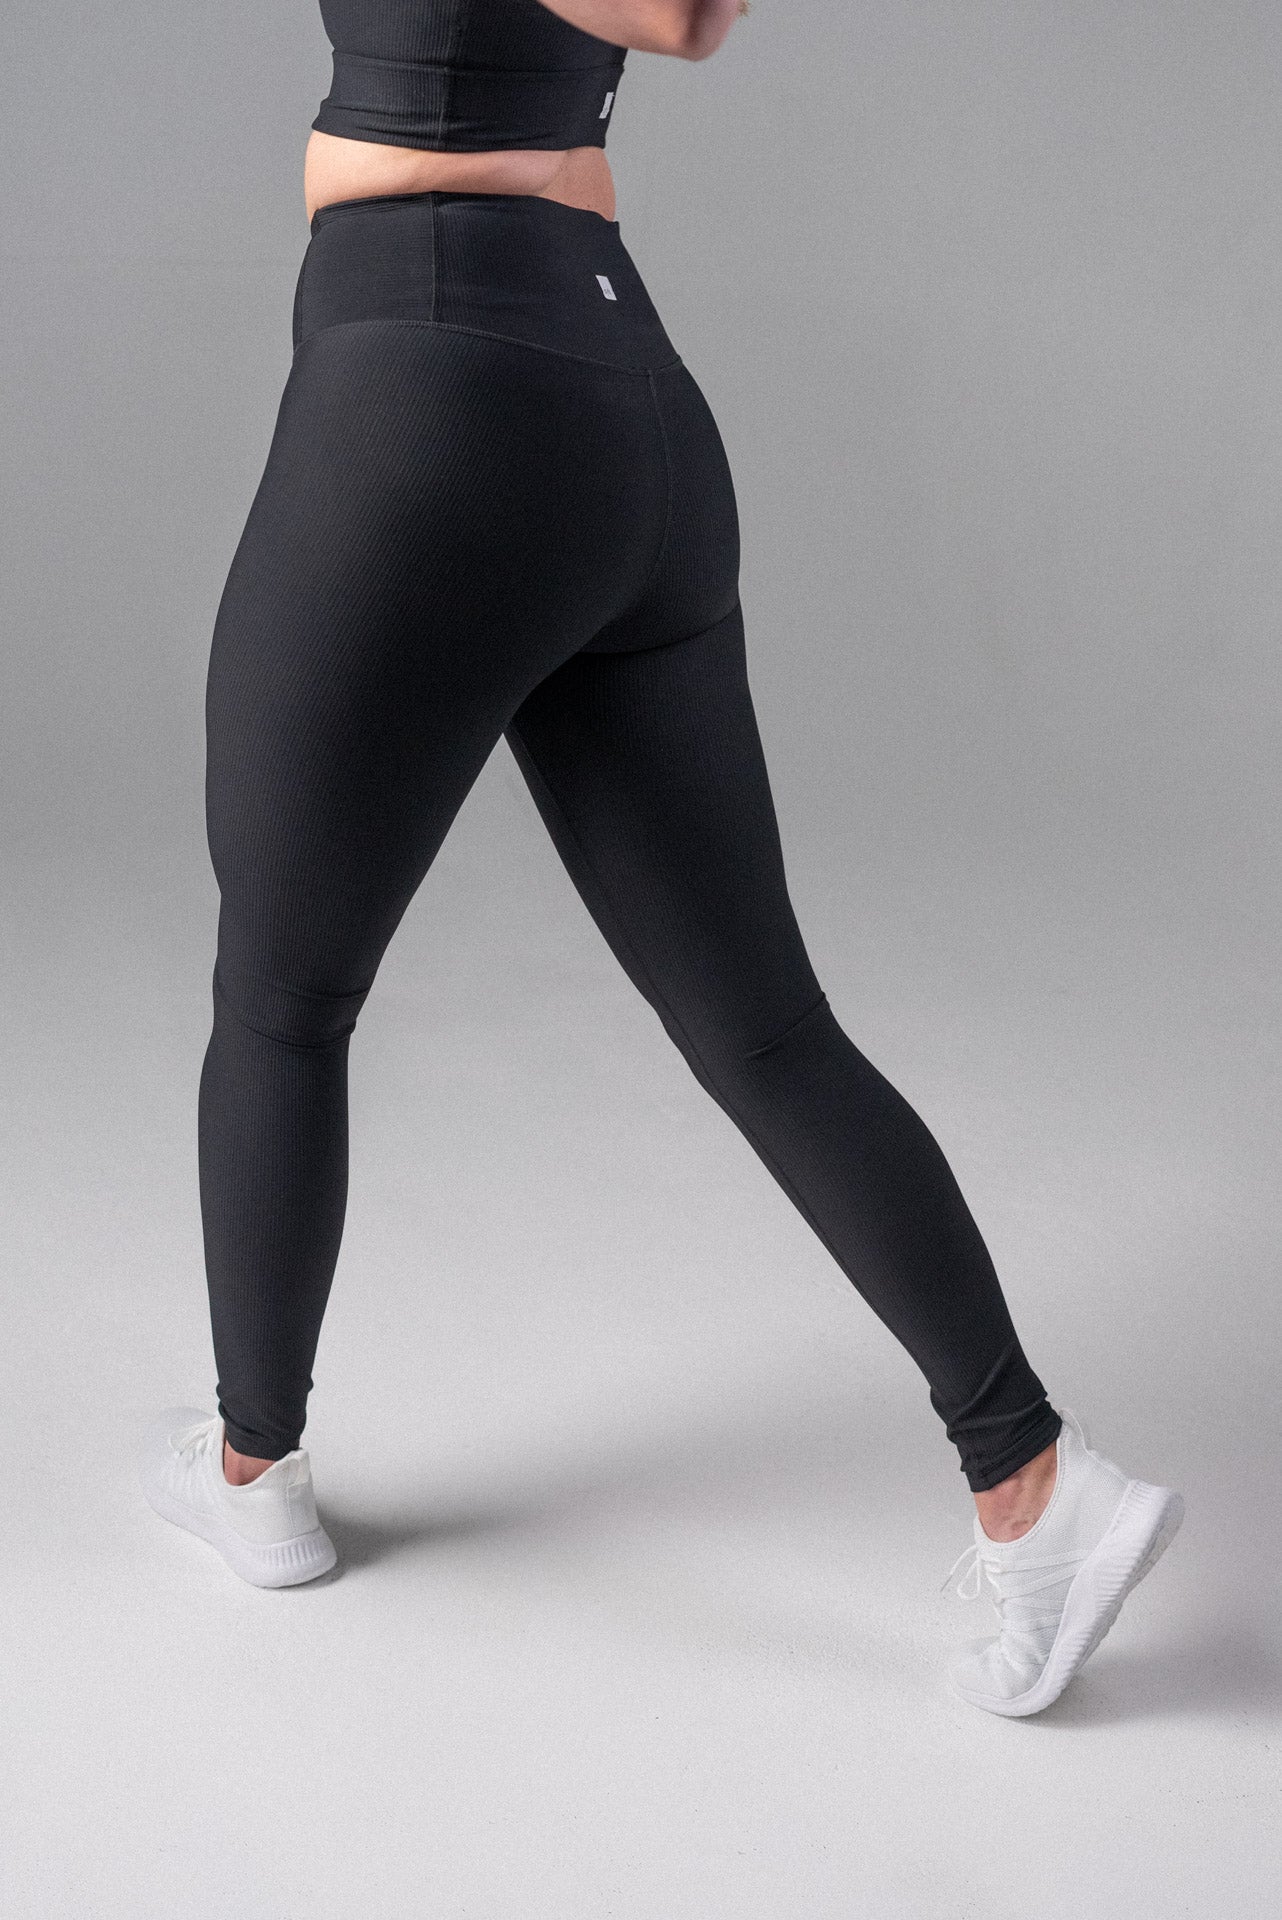 Alyth Active - Pocketed leggings have never looked so good